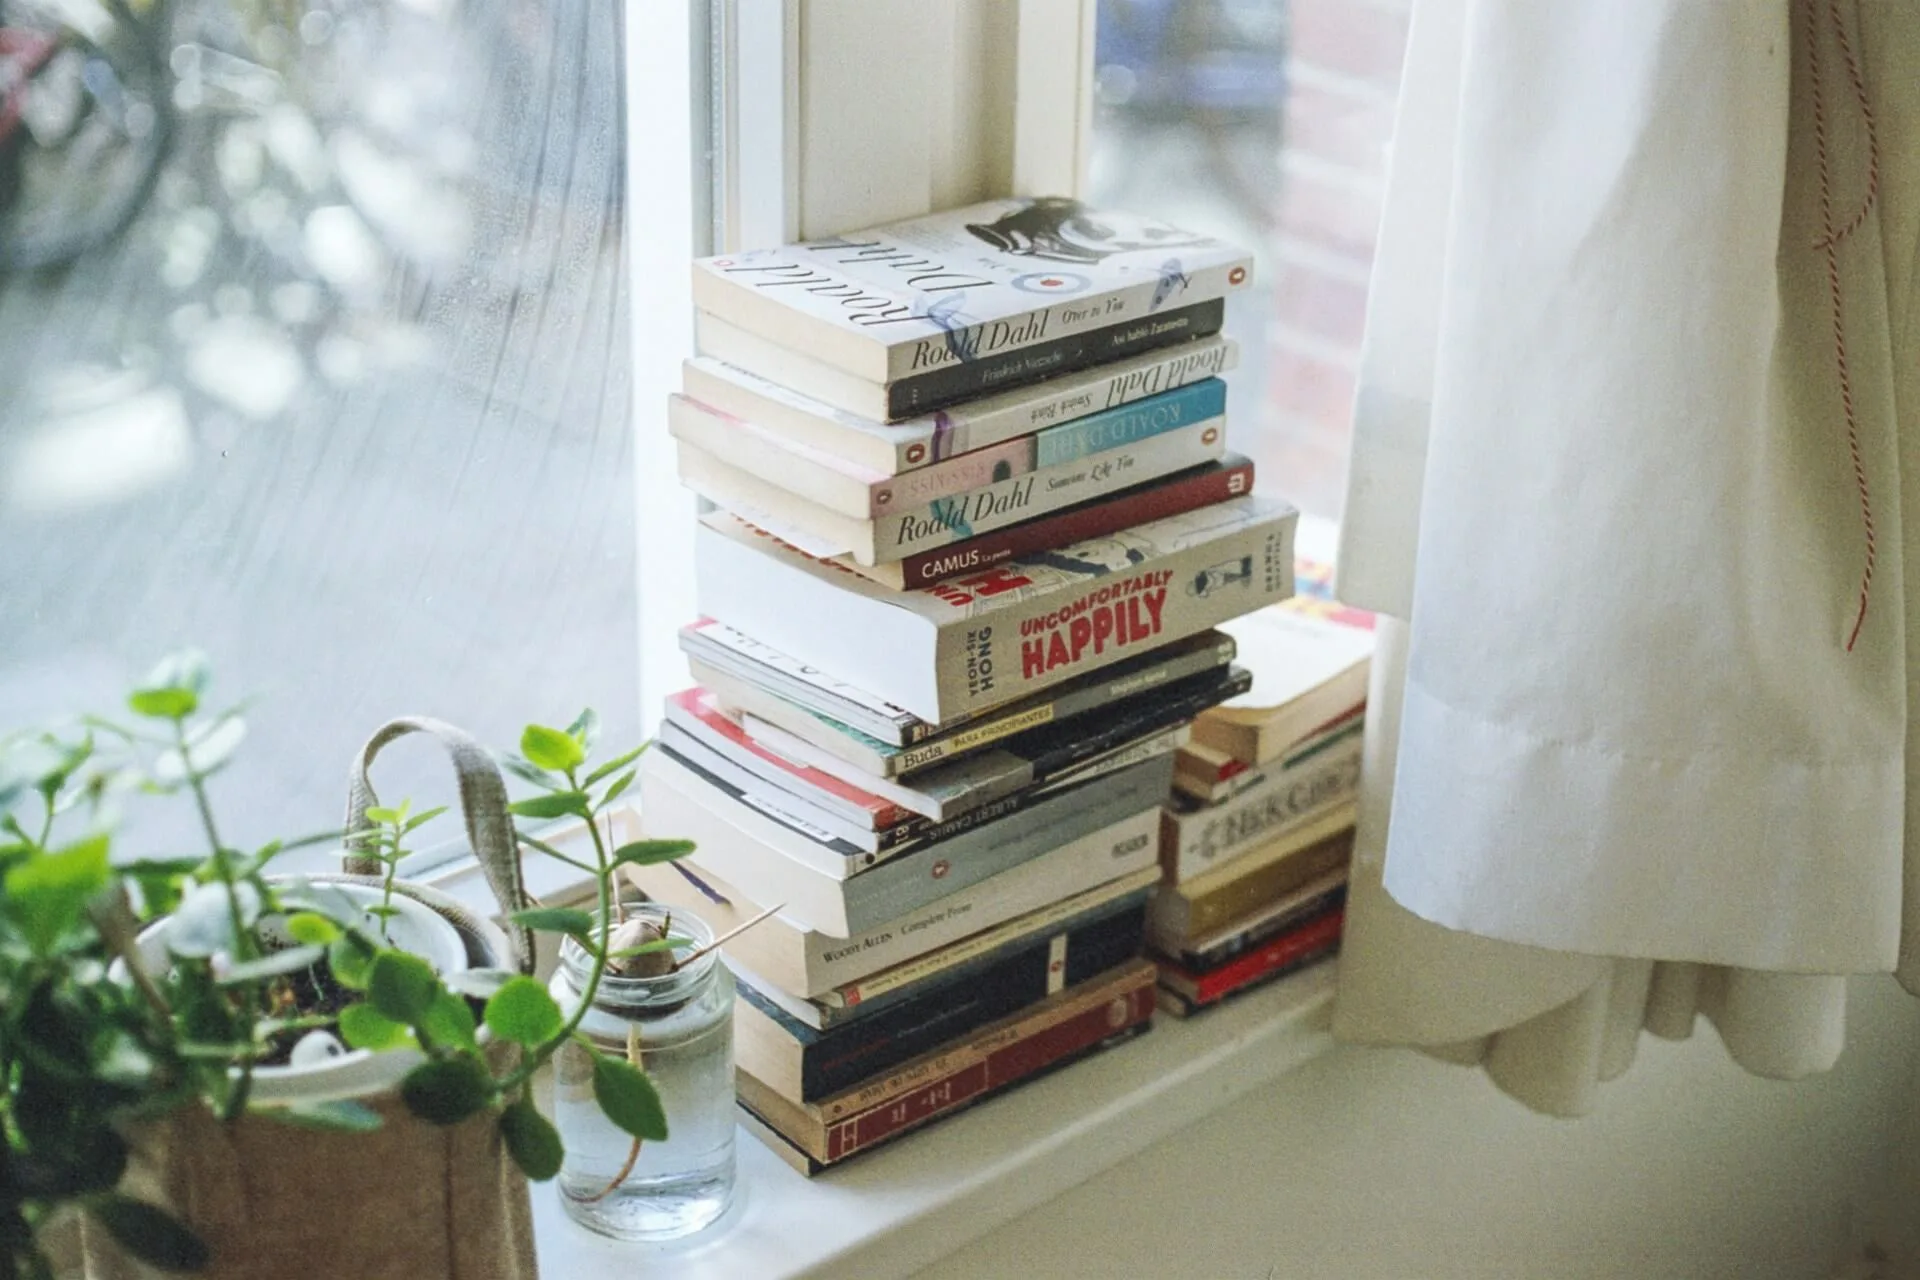 How to read 10 books a month - a stack of well-read books on a windowsill, peaking out from behind a white curtain.